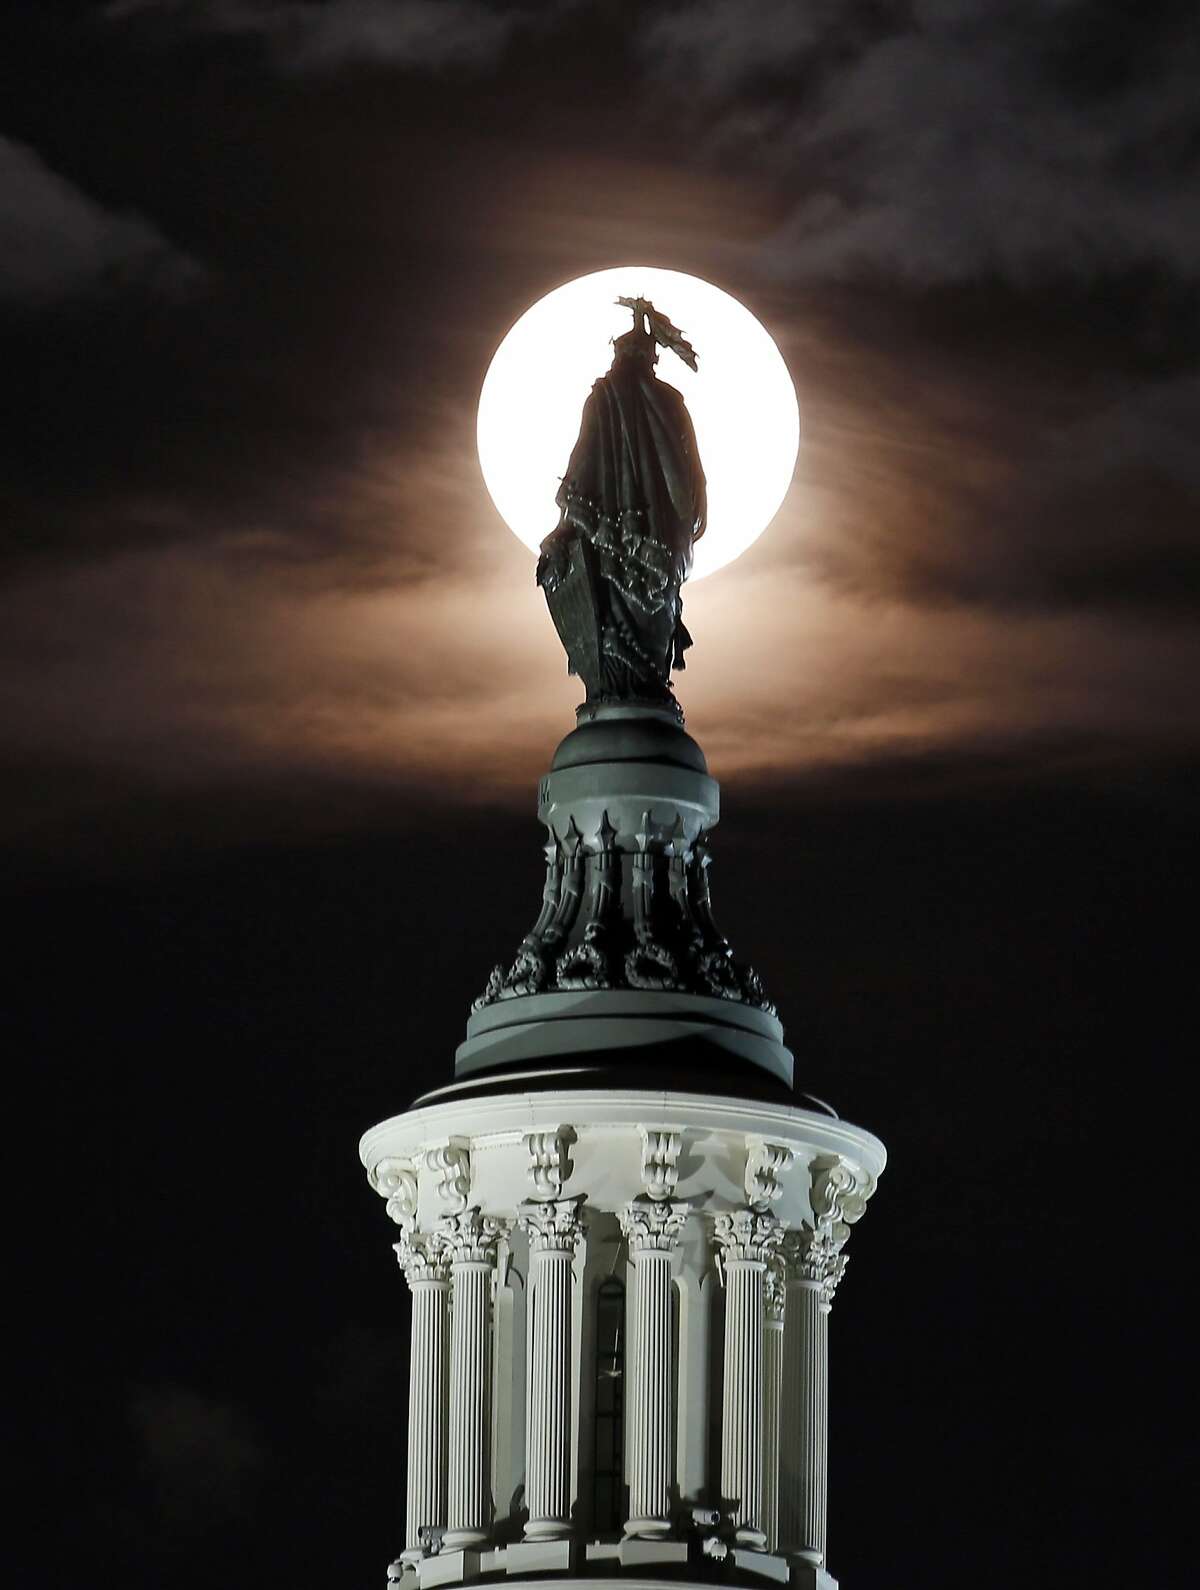 The supermoon rises through the clouds behind the bronze Statue of Freedom by Thomas Crawford atop the U.S. Capitol.